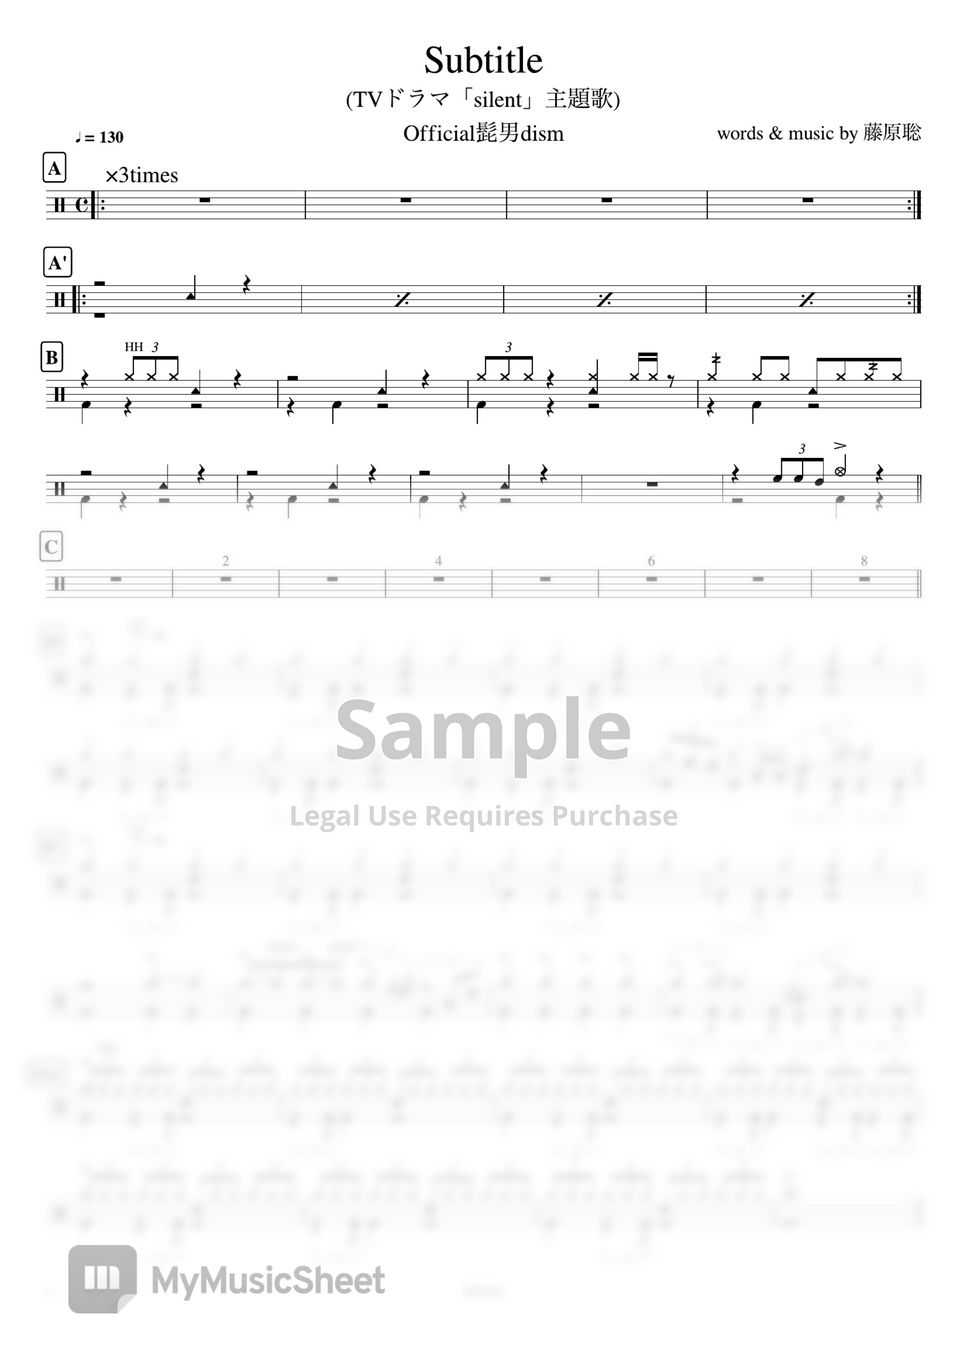 Official髭男dism - Subtitle (TVドラマ「silent」主題歌) by Cookai's J-pop Drum sheet music!!!